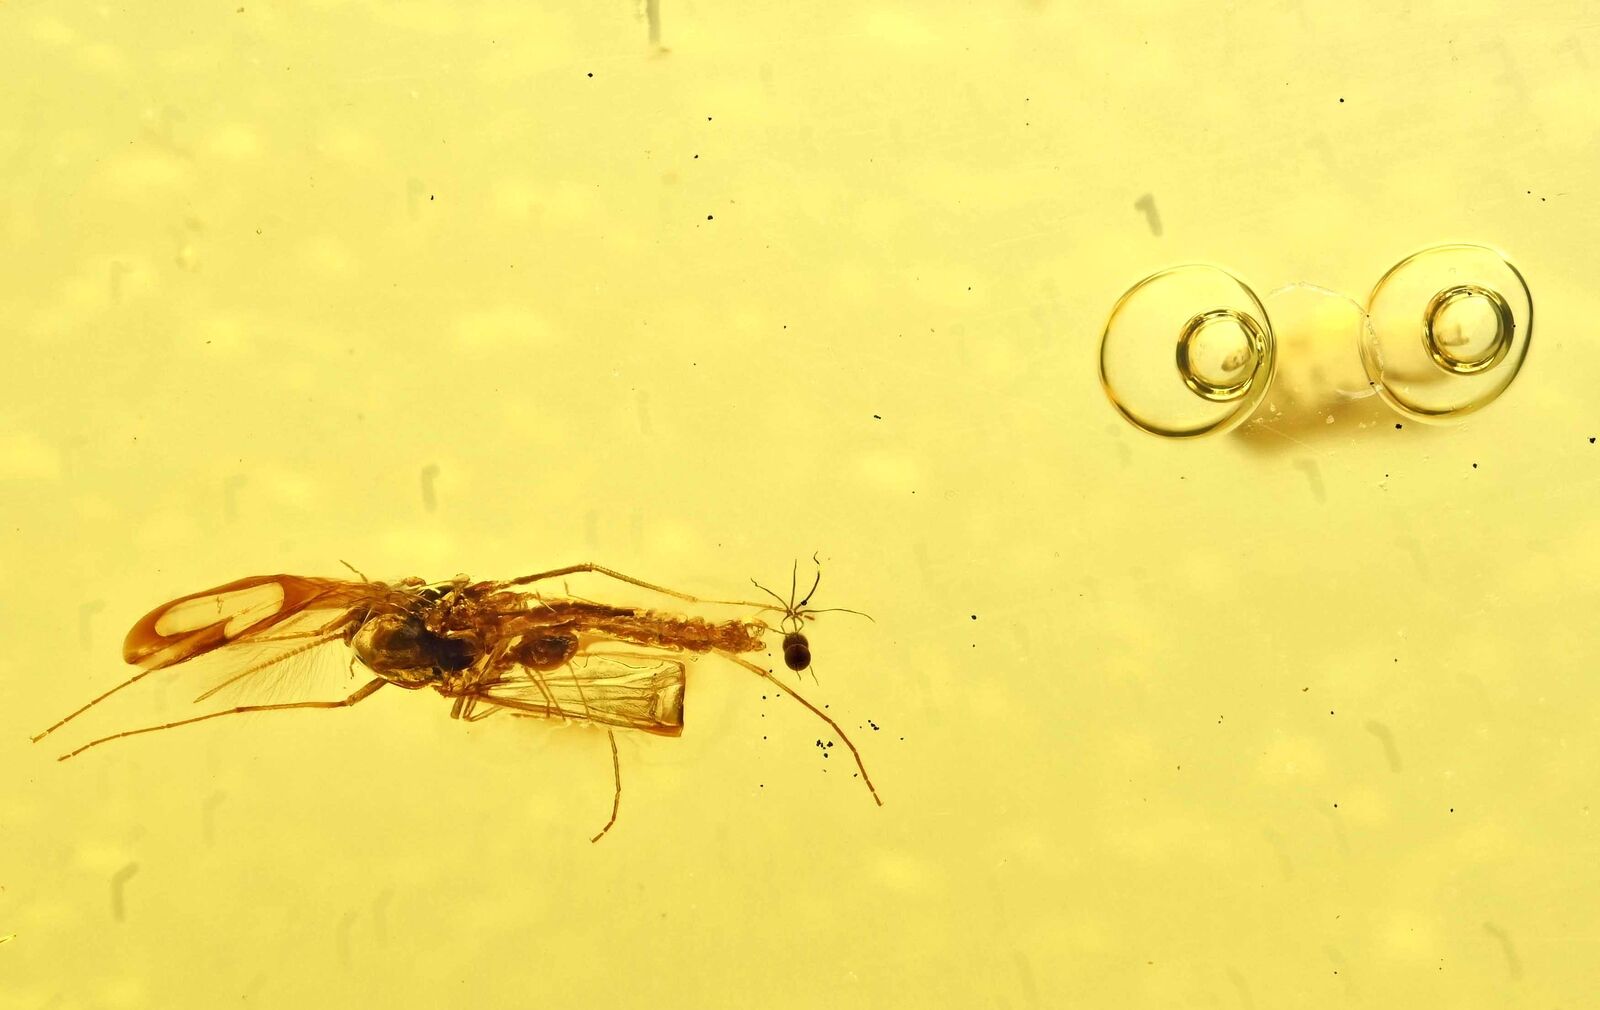 Parasitic or Phoretic Mite on Midge, Fossil Inclusion in Baltic Amber